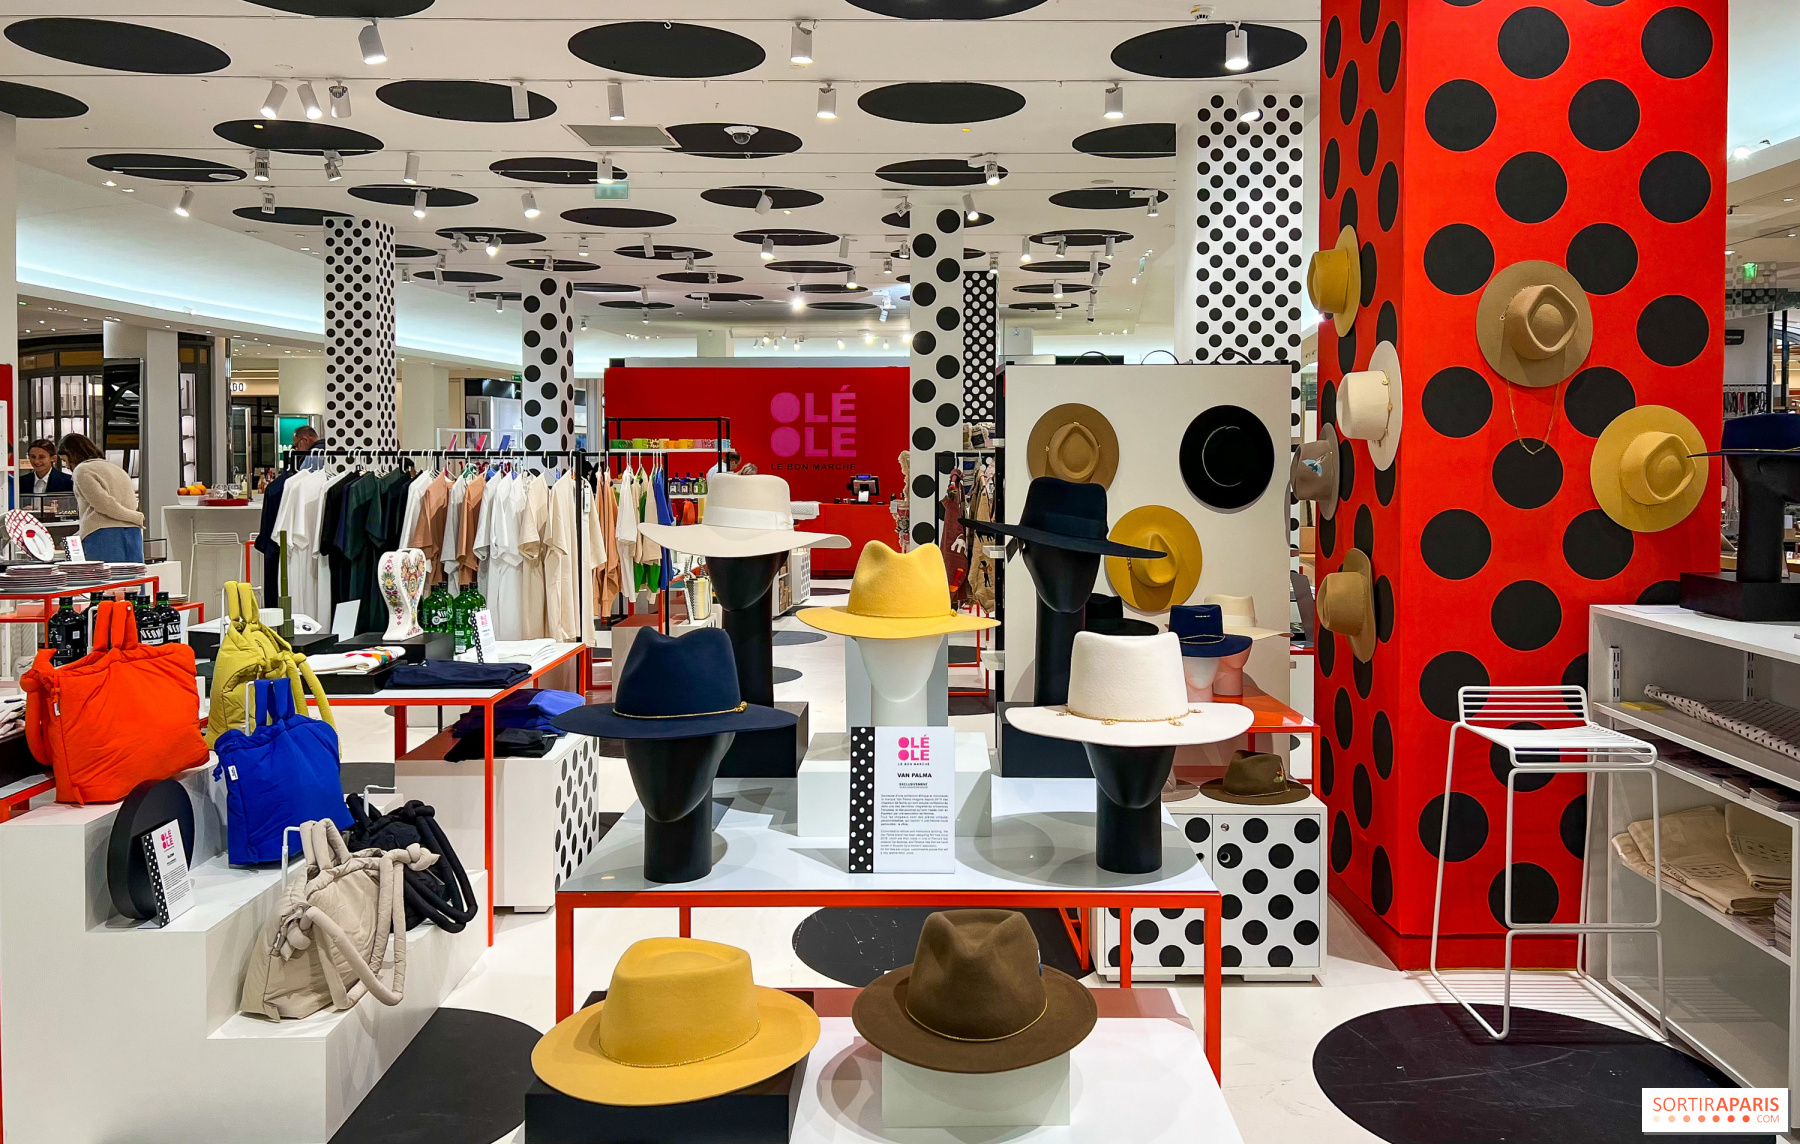 LET'S GO LOGO: THE NEW EXHIBITION AT LE BON MARCHE, YOU CANNOT MISS OUT